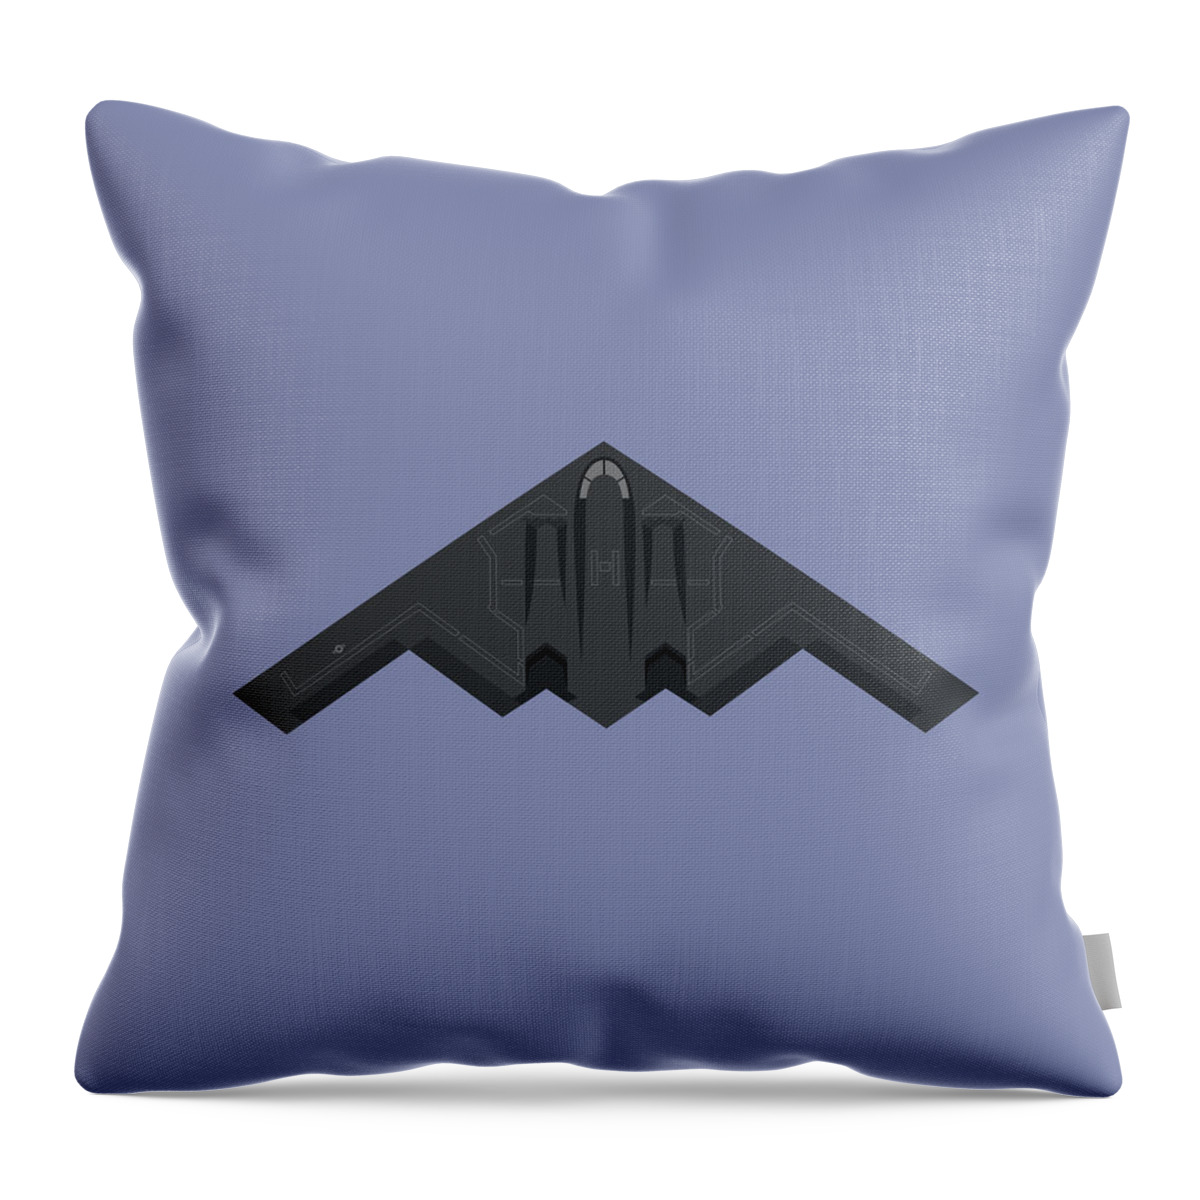 Aviation Throw Pillow featuring the digital art B2 Stealth Bomber Jet Aircraft - Twilight by Organic Synthesis